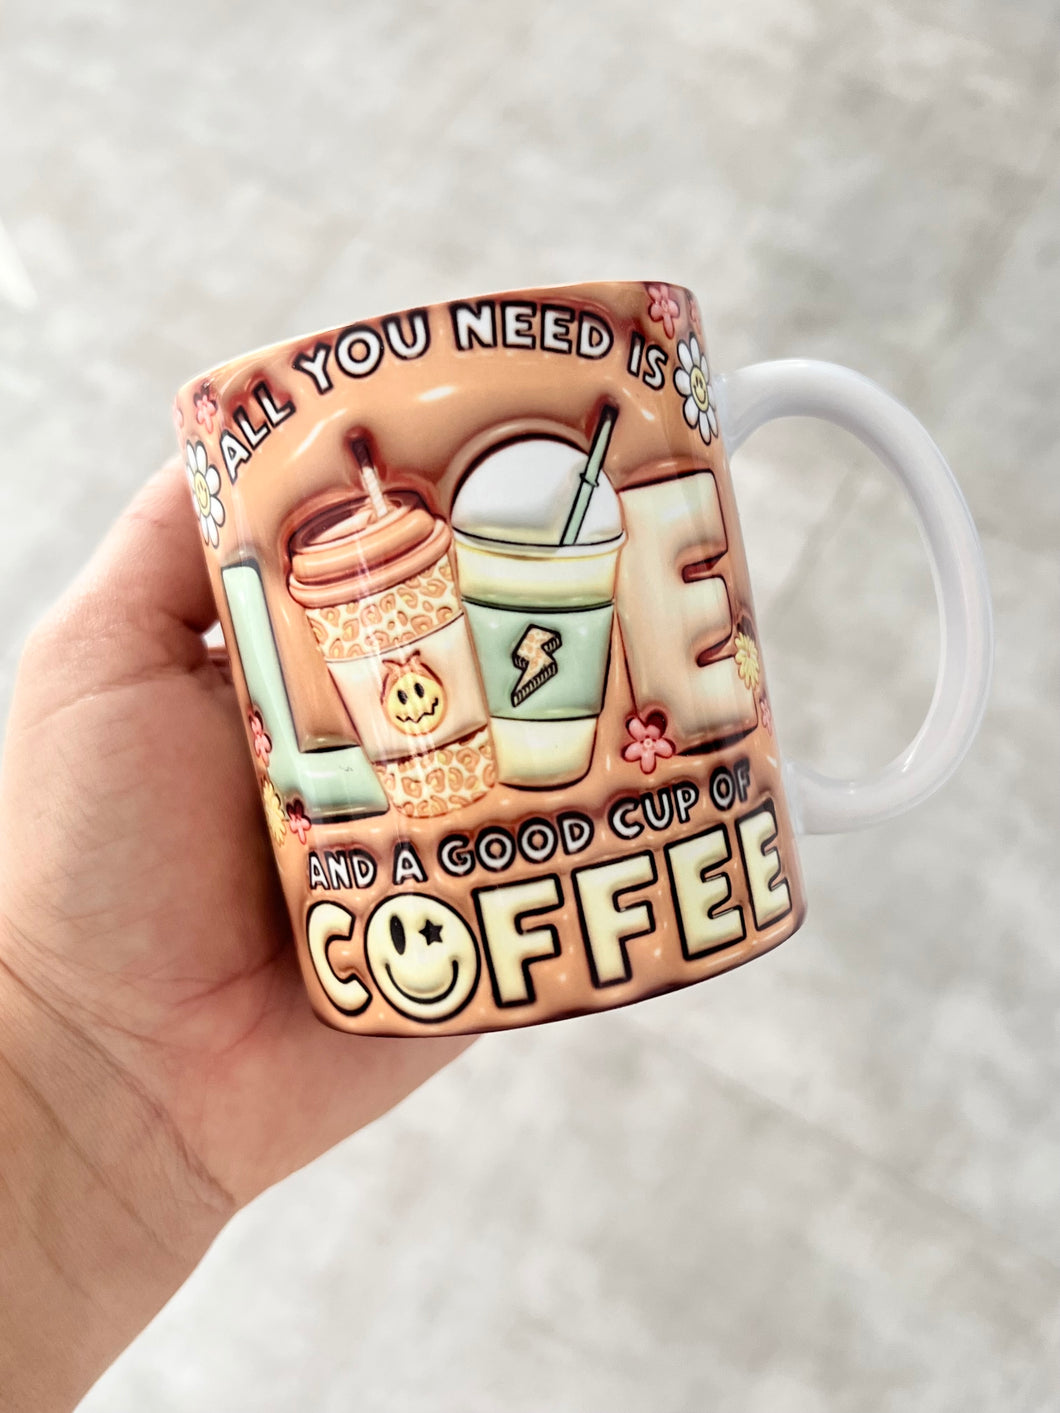 All you need is love and a good cup of coffee - Mug